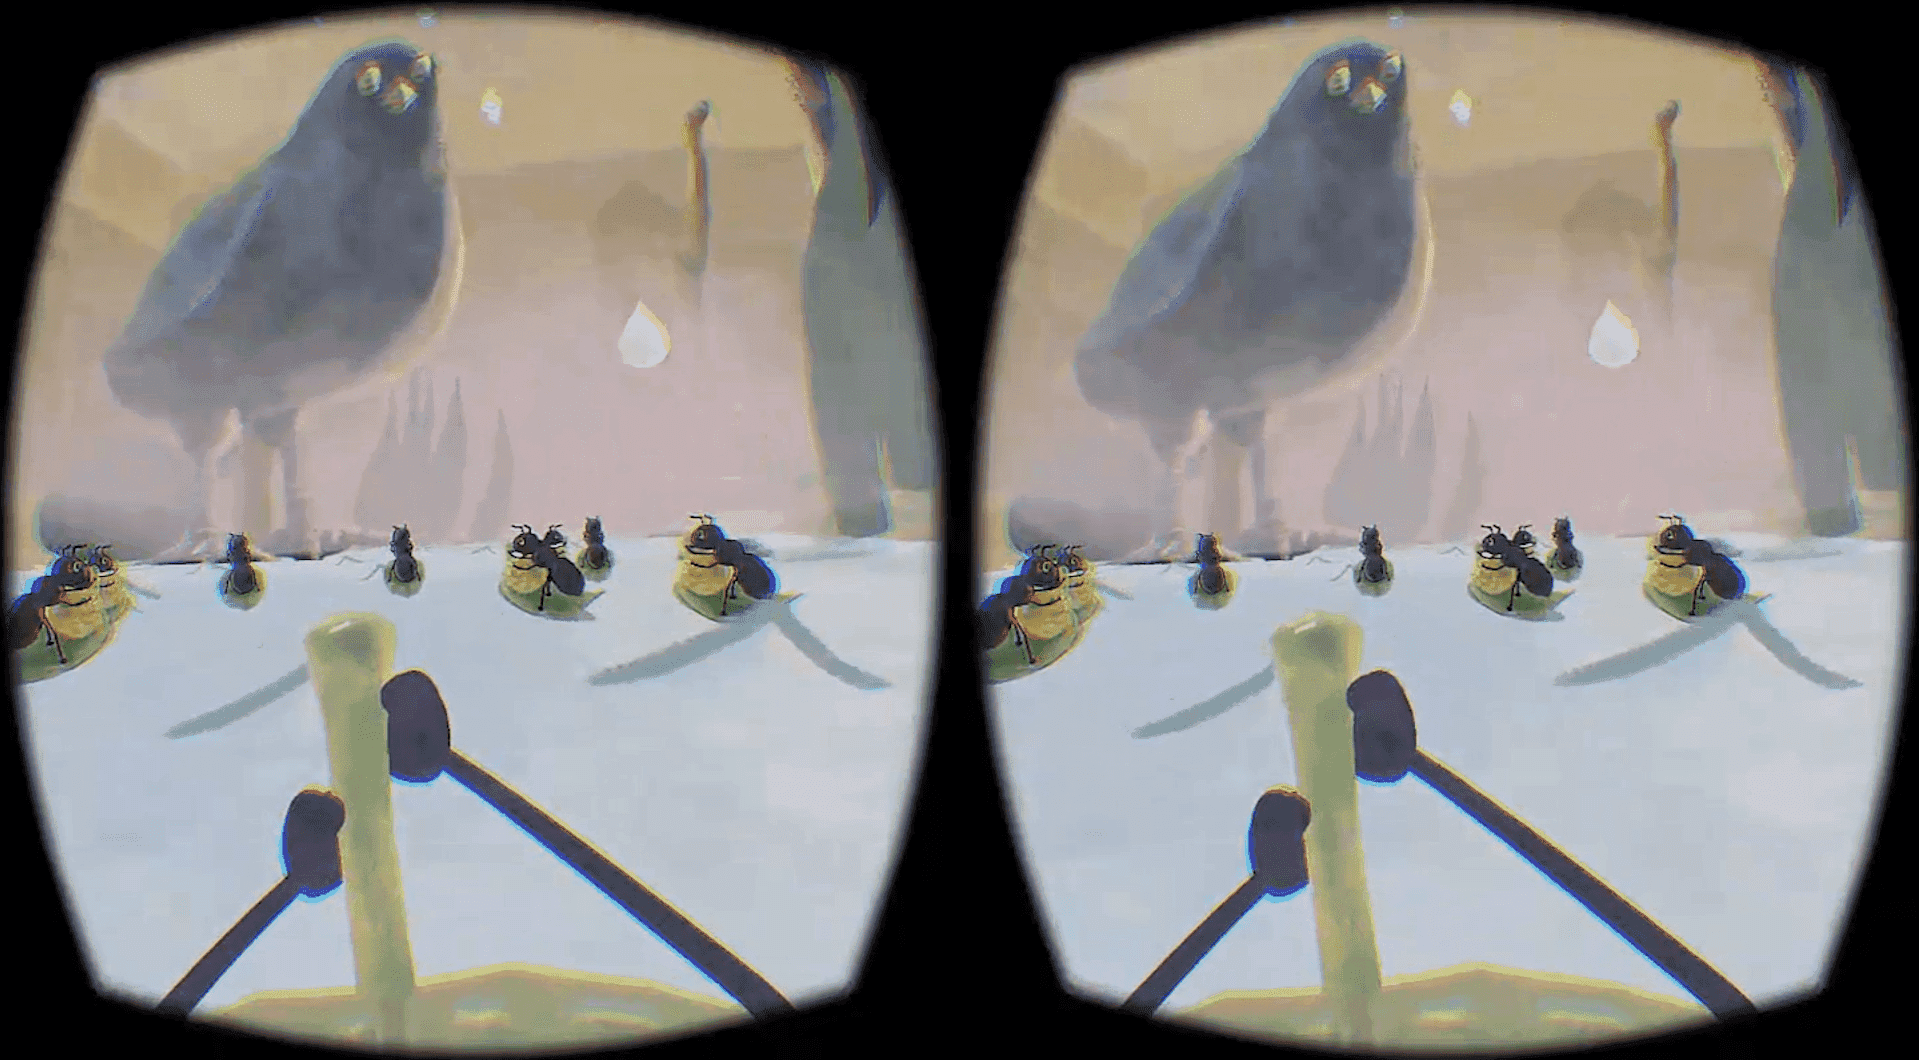 An Ant's Life VR